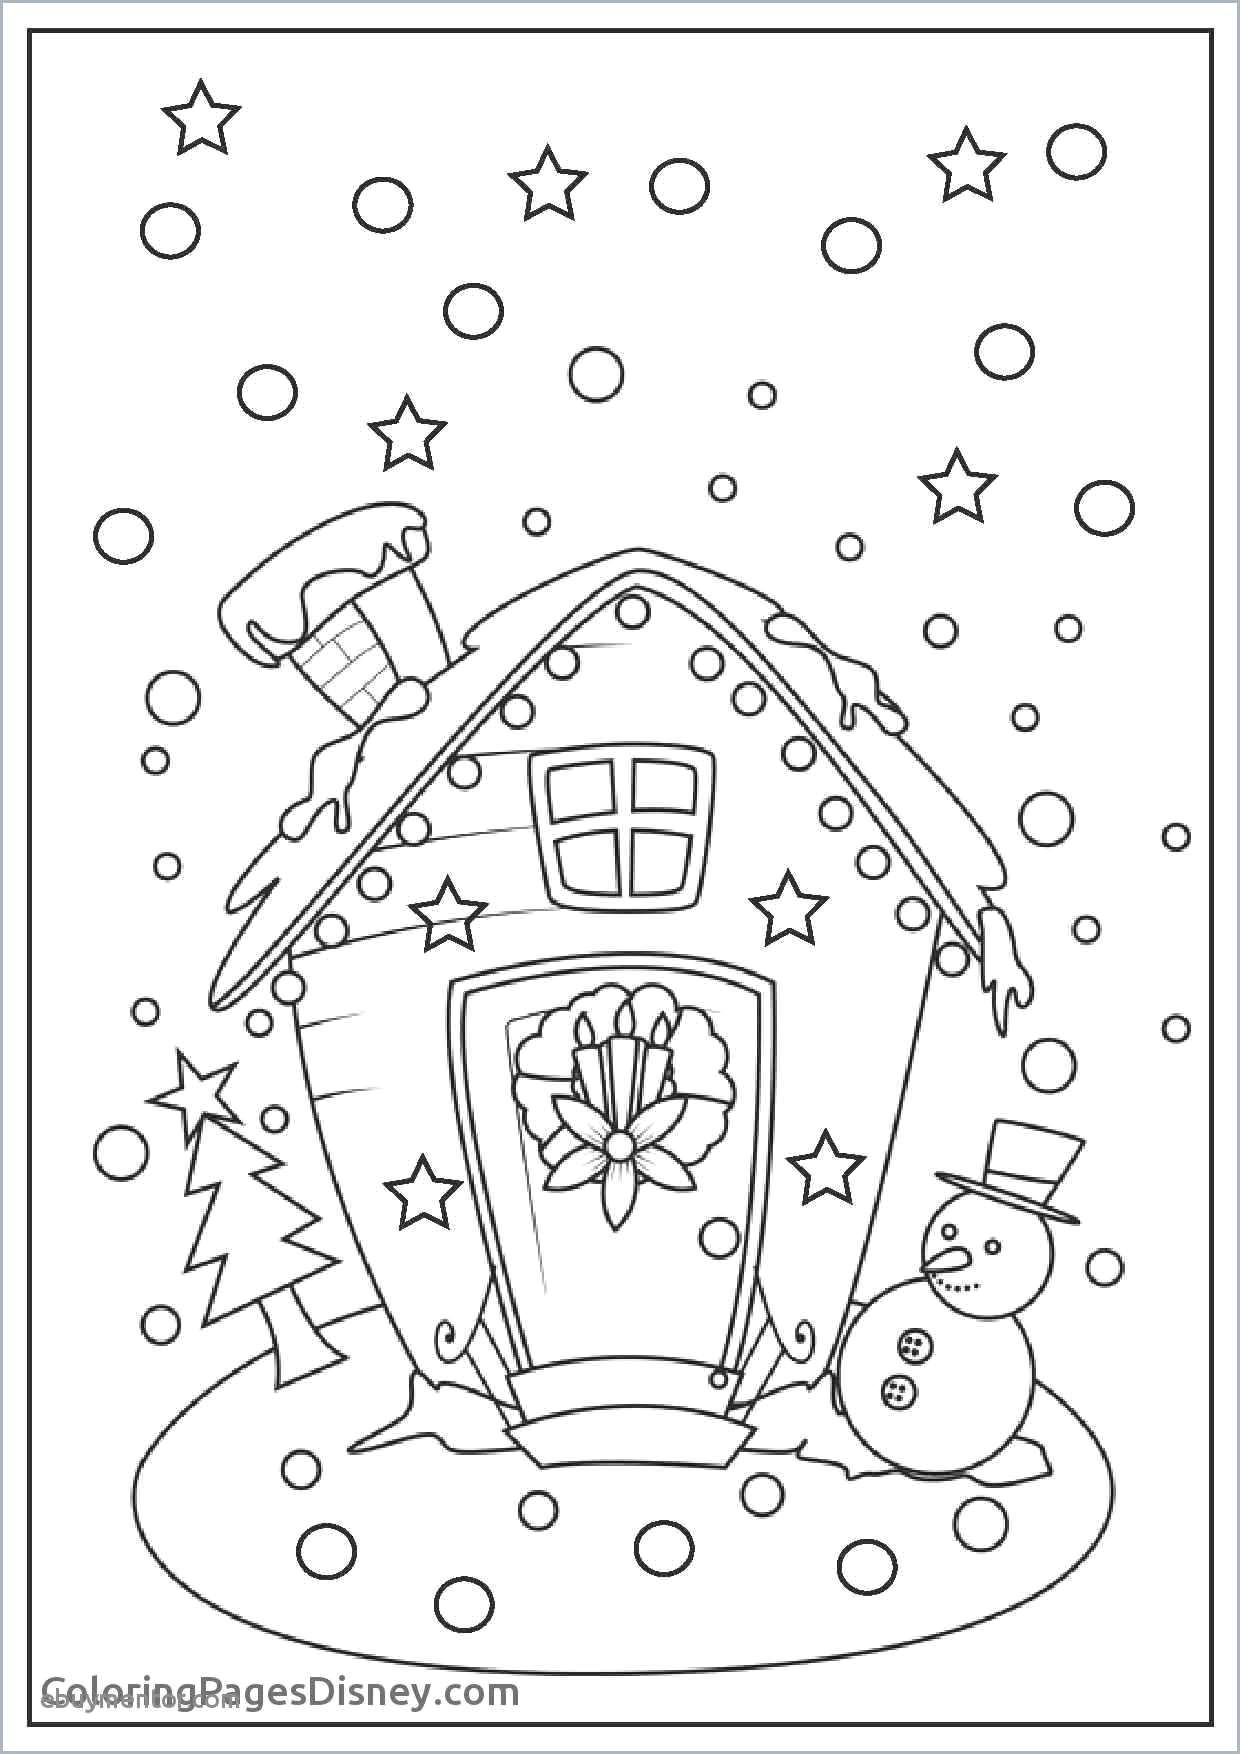 coloring sheets for kids pretty free christmas coloring pages for kids cool coloring printables 0d of